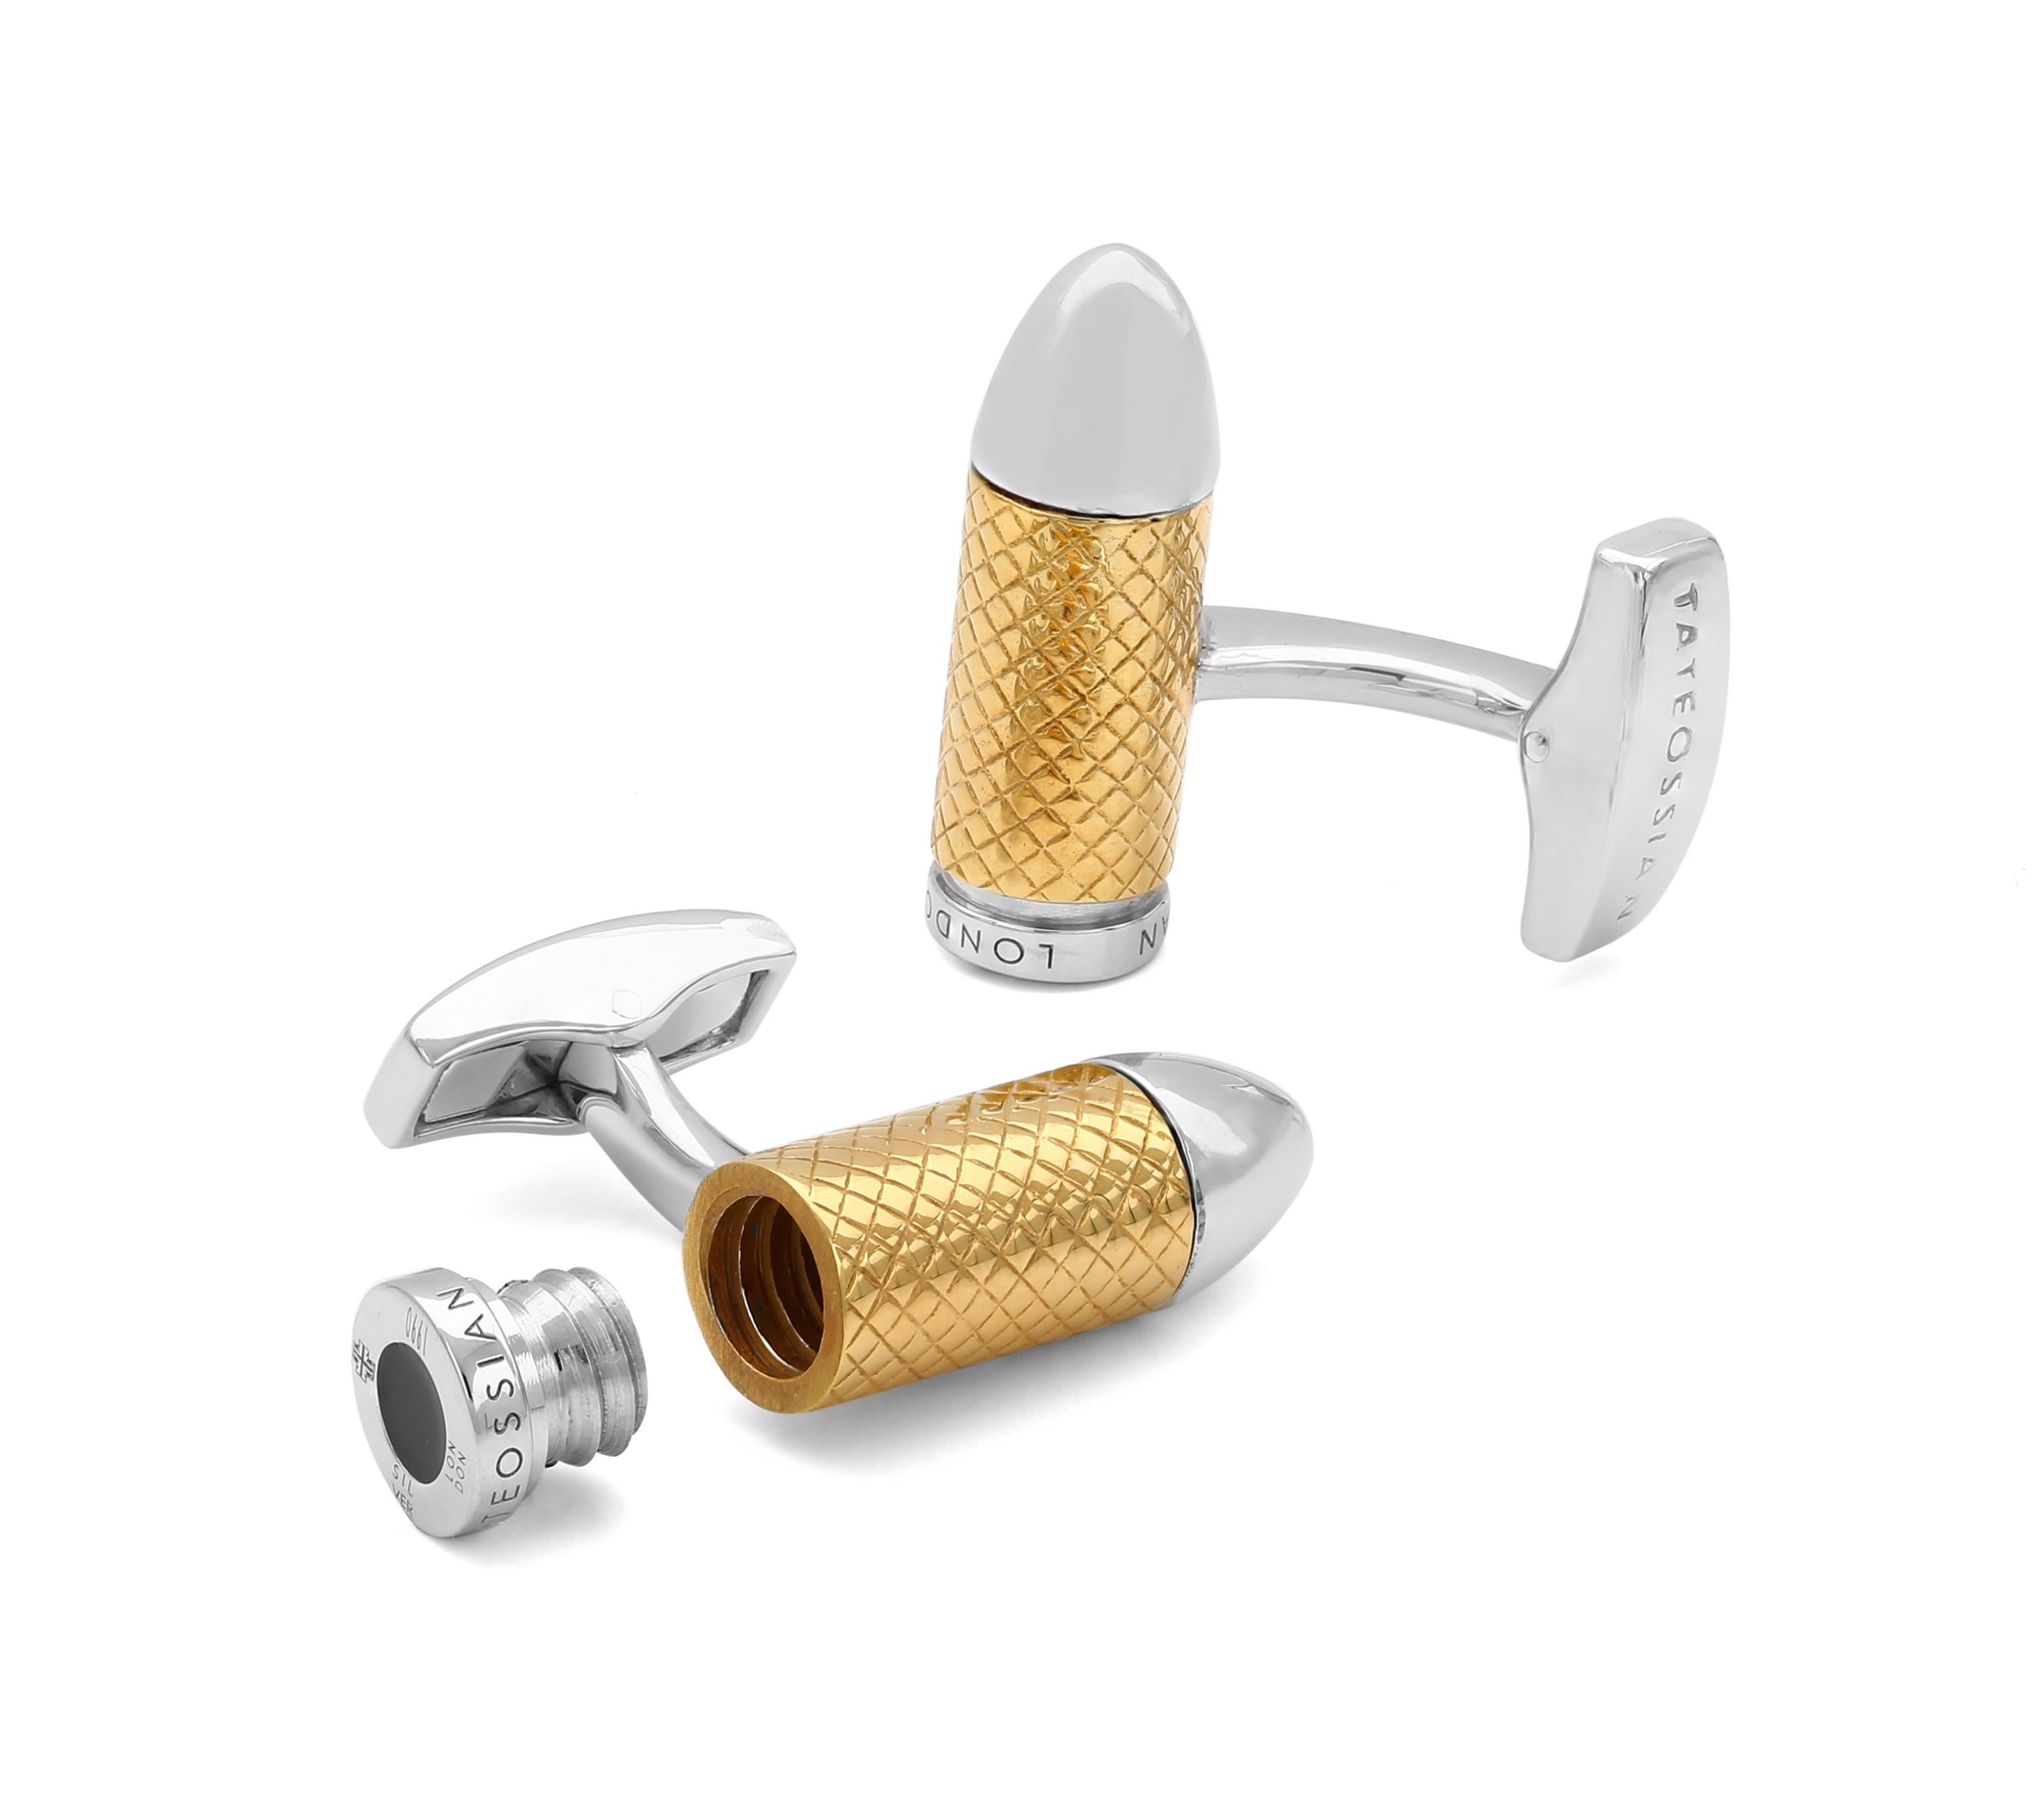 This edgy minimalistic style comprimises of sleek two toned plating combined with our signature diamond pattern, adding texturing and metallic colouring. Twist the end of the bullet to unveil the hidden chamber inside. 2 micron yellow gold plated